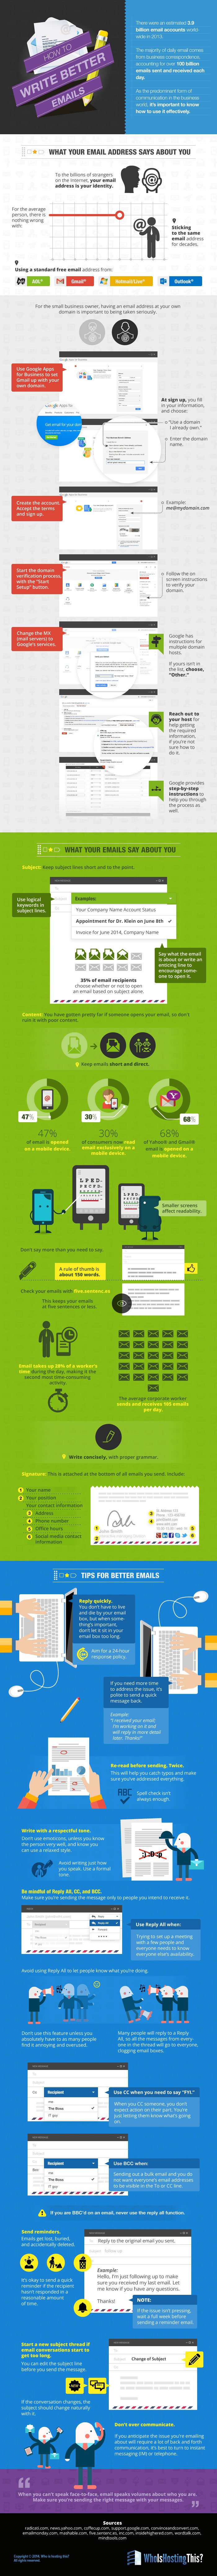 How to Write Better Emails [Infographic]